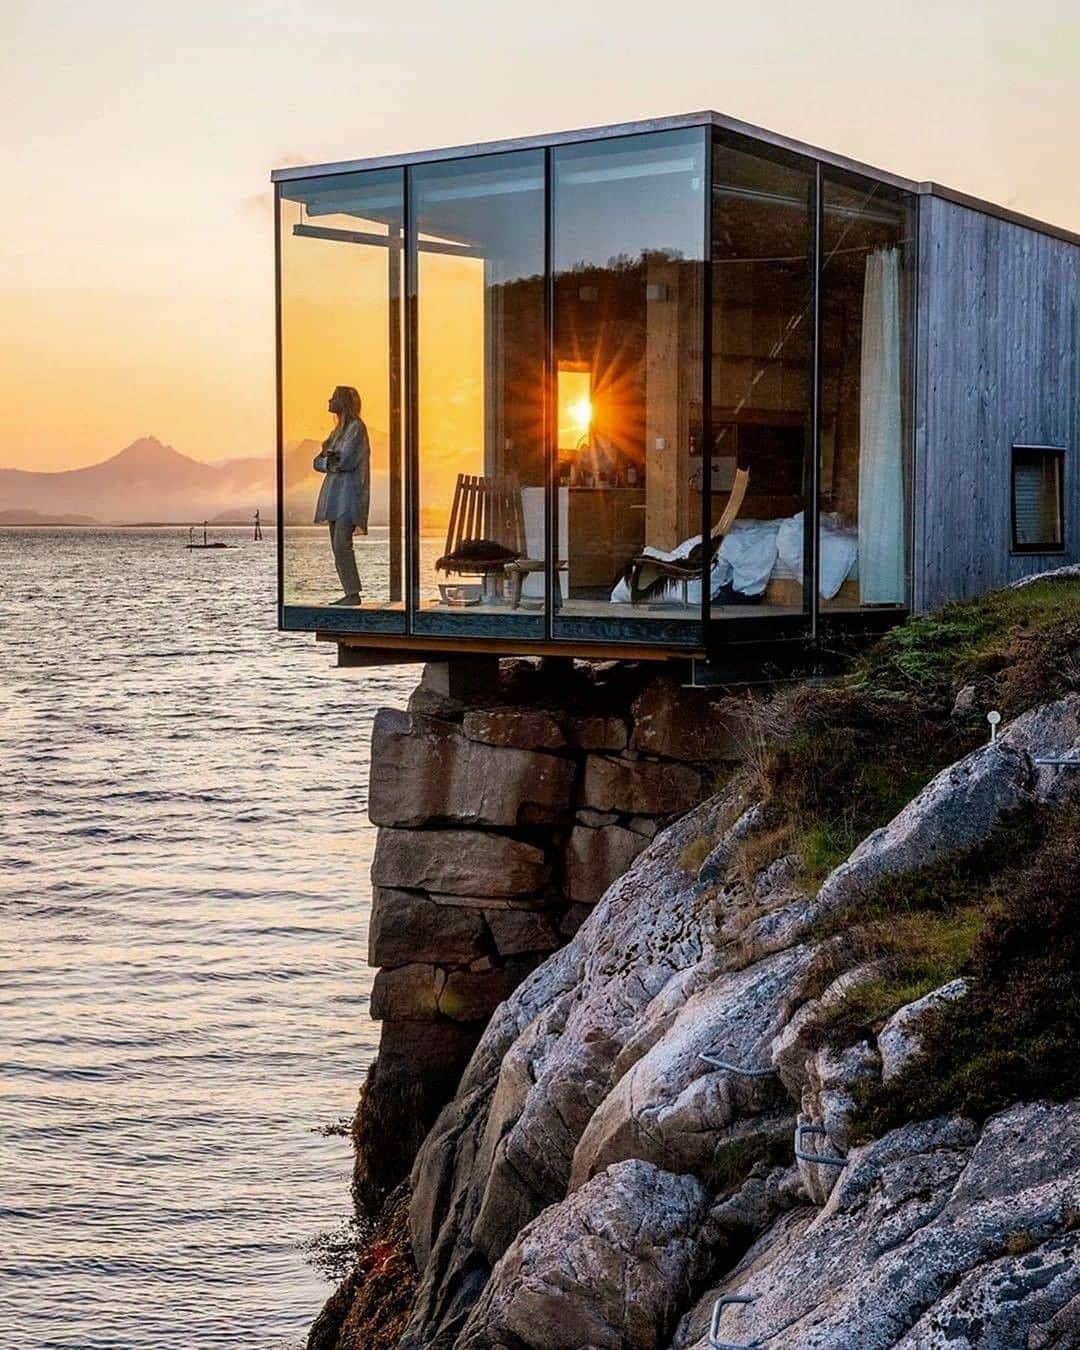 Architecture - Housesさんのインスタグラム写真 - (Architecture - HousesInstagram)「⁣ 𝐌𝐨𝐬𝐭 𝐥𝐢𝐤𝐞𝐝 𝐩𝐨𝐬𝐭𝐬 𝐢𝐧 𝟐𝟎𝟐𝟎 🏆⁣⁣ We've lived 365 days with 365 posts with the best architecture projects but, which ones have been more popular? 👉  Swipe left to discover our 𝗧𝗢𝗣 𝟭𝟬 👏.⁣ And your favorite is... [leave a comment below]⁣ ⁣⁣ 👀  And don't forget to 𝙧𝙚𝙖𝙙 𝙤𝙪𝙧 𝙜𝙪𝙞𝙙𝙚 of 2020 most liked posts.⁣⁣ _____⁣⁣⁣⁣⁣⁣⁣⁣⁣⁣⁣⁣⁣⁣⁣⁣ 📸⁣⁣ All credits in our guide 📖⁣⁣ #archidesignhome⁣⁣⁣⁣⁣ _____⁣⁣⁣⁣⁣⁣⁣⁣⁣ #top10 #likedposts #mostlikedpost #architecture #architect #arquitectura #archilovers #amazingarchitecture #archigram #picoftheday #ModernArchitect #architects #lovearchitecture #architecturalvisualization」1月2日 0時00分 - _archidesignhome_